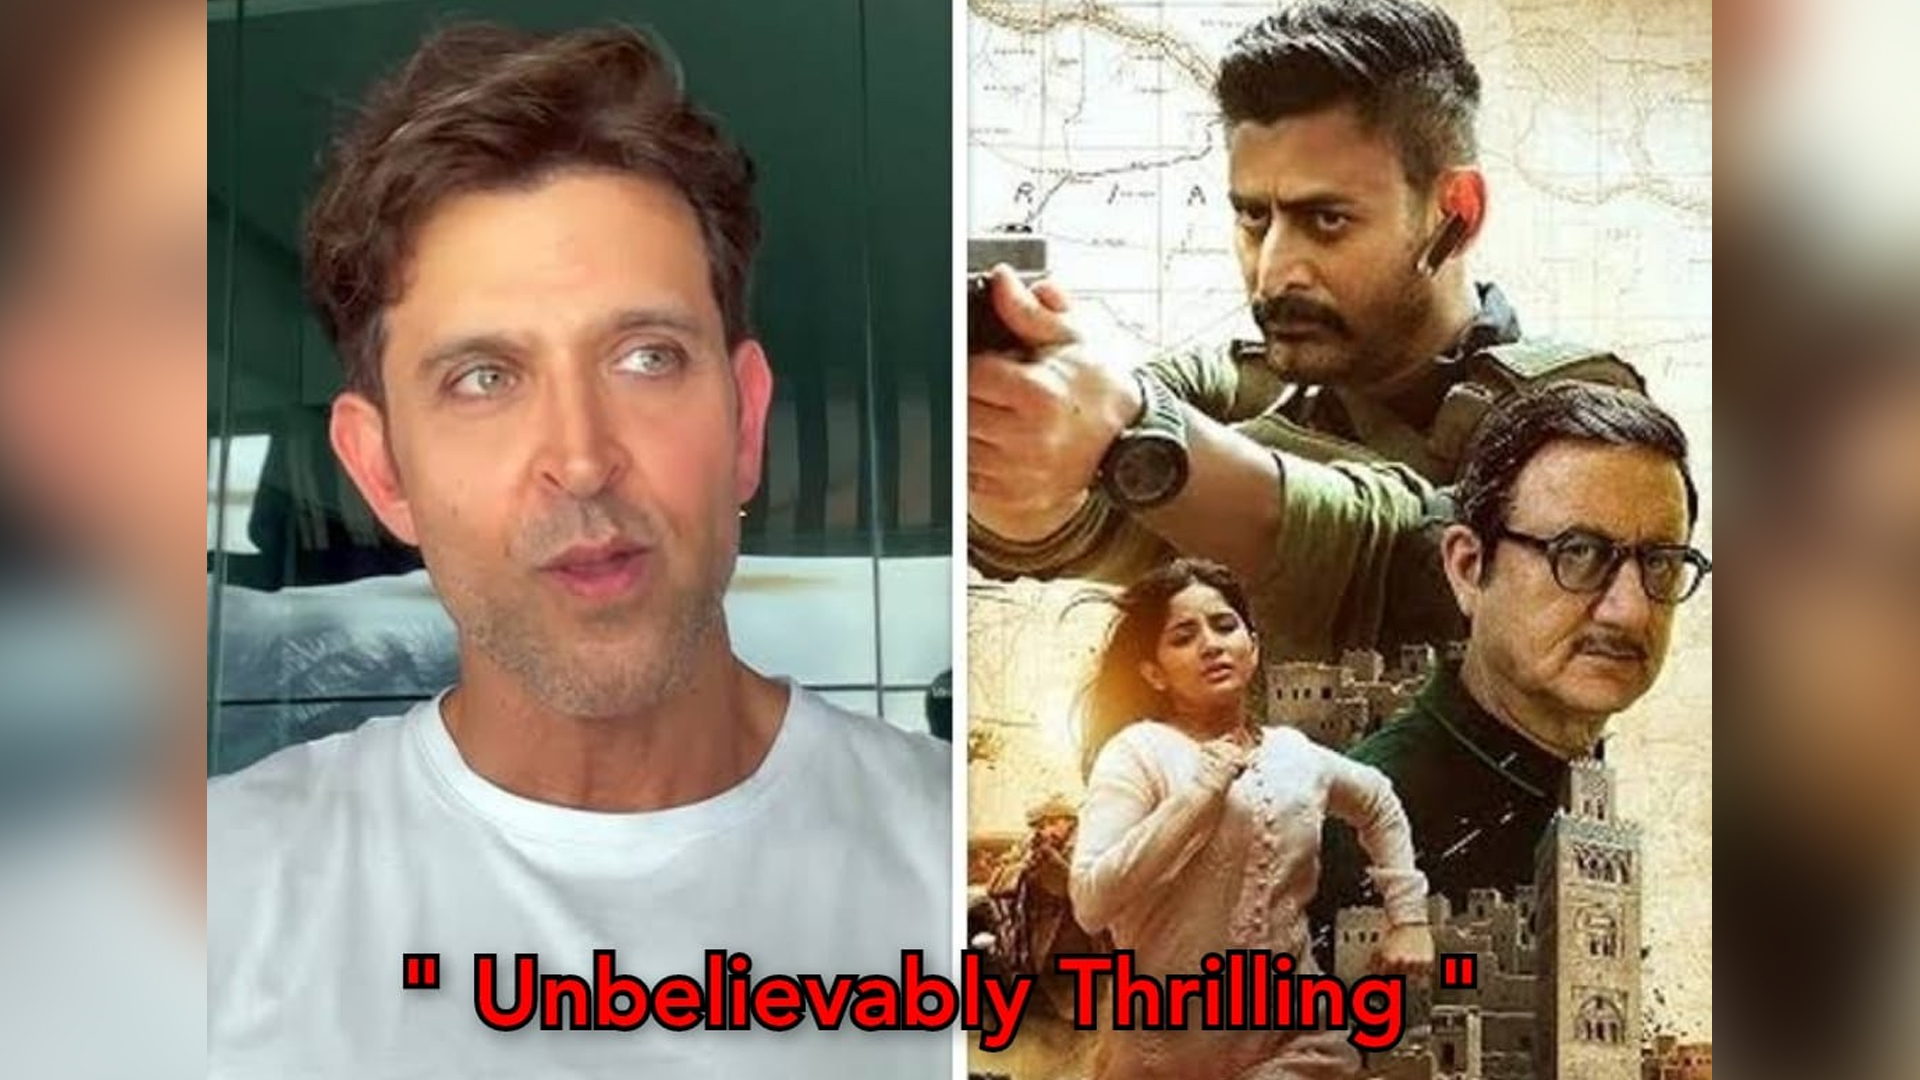 Hrithik Roshan Shares A Congratulatary Video Message After Watching ” The Freelancer” : Calls It As Unbelievably Thrilling Experience.